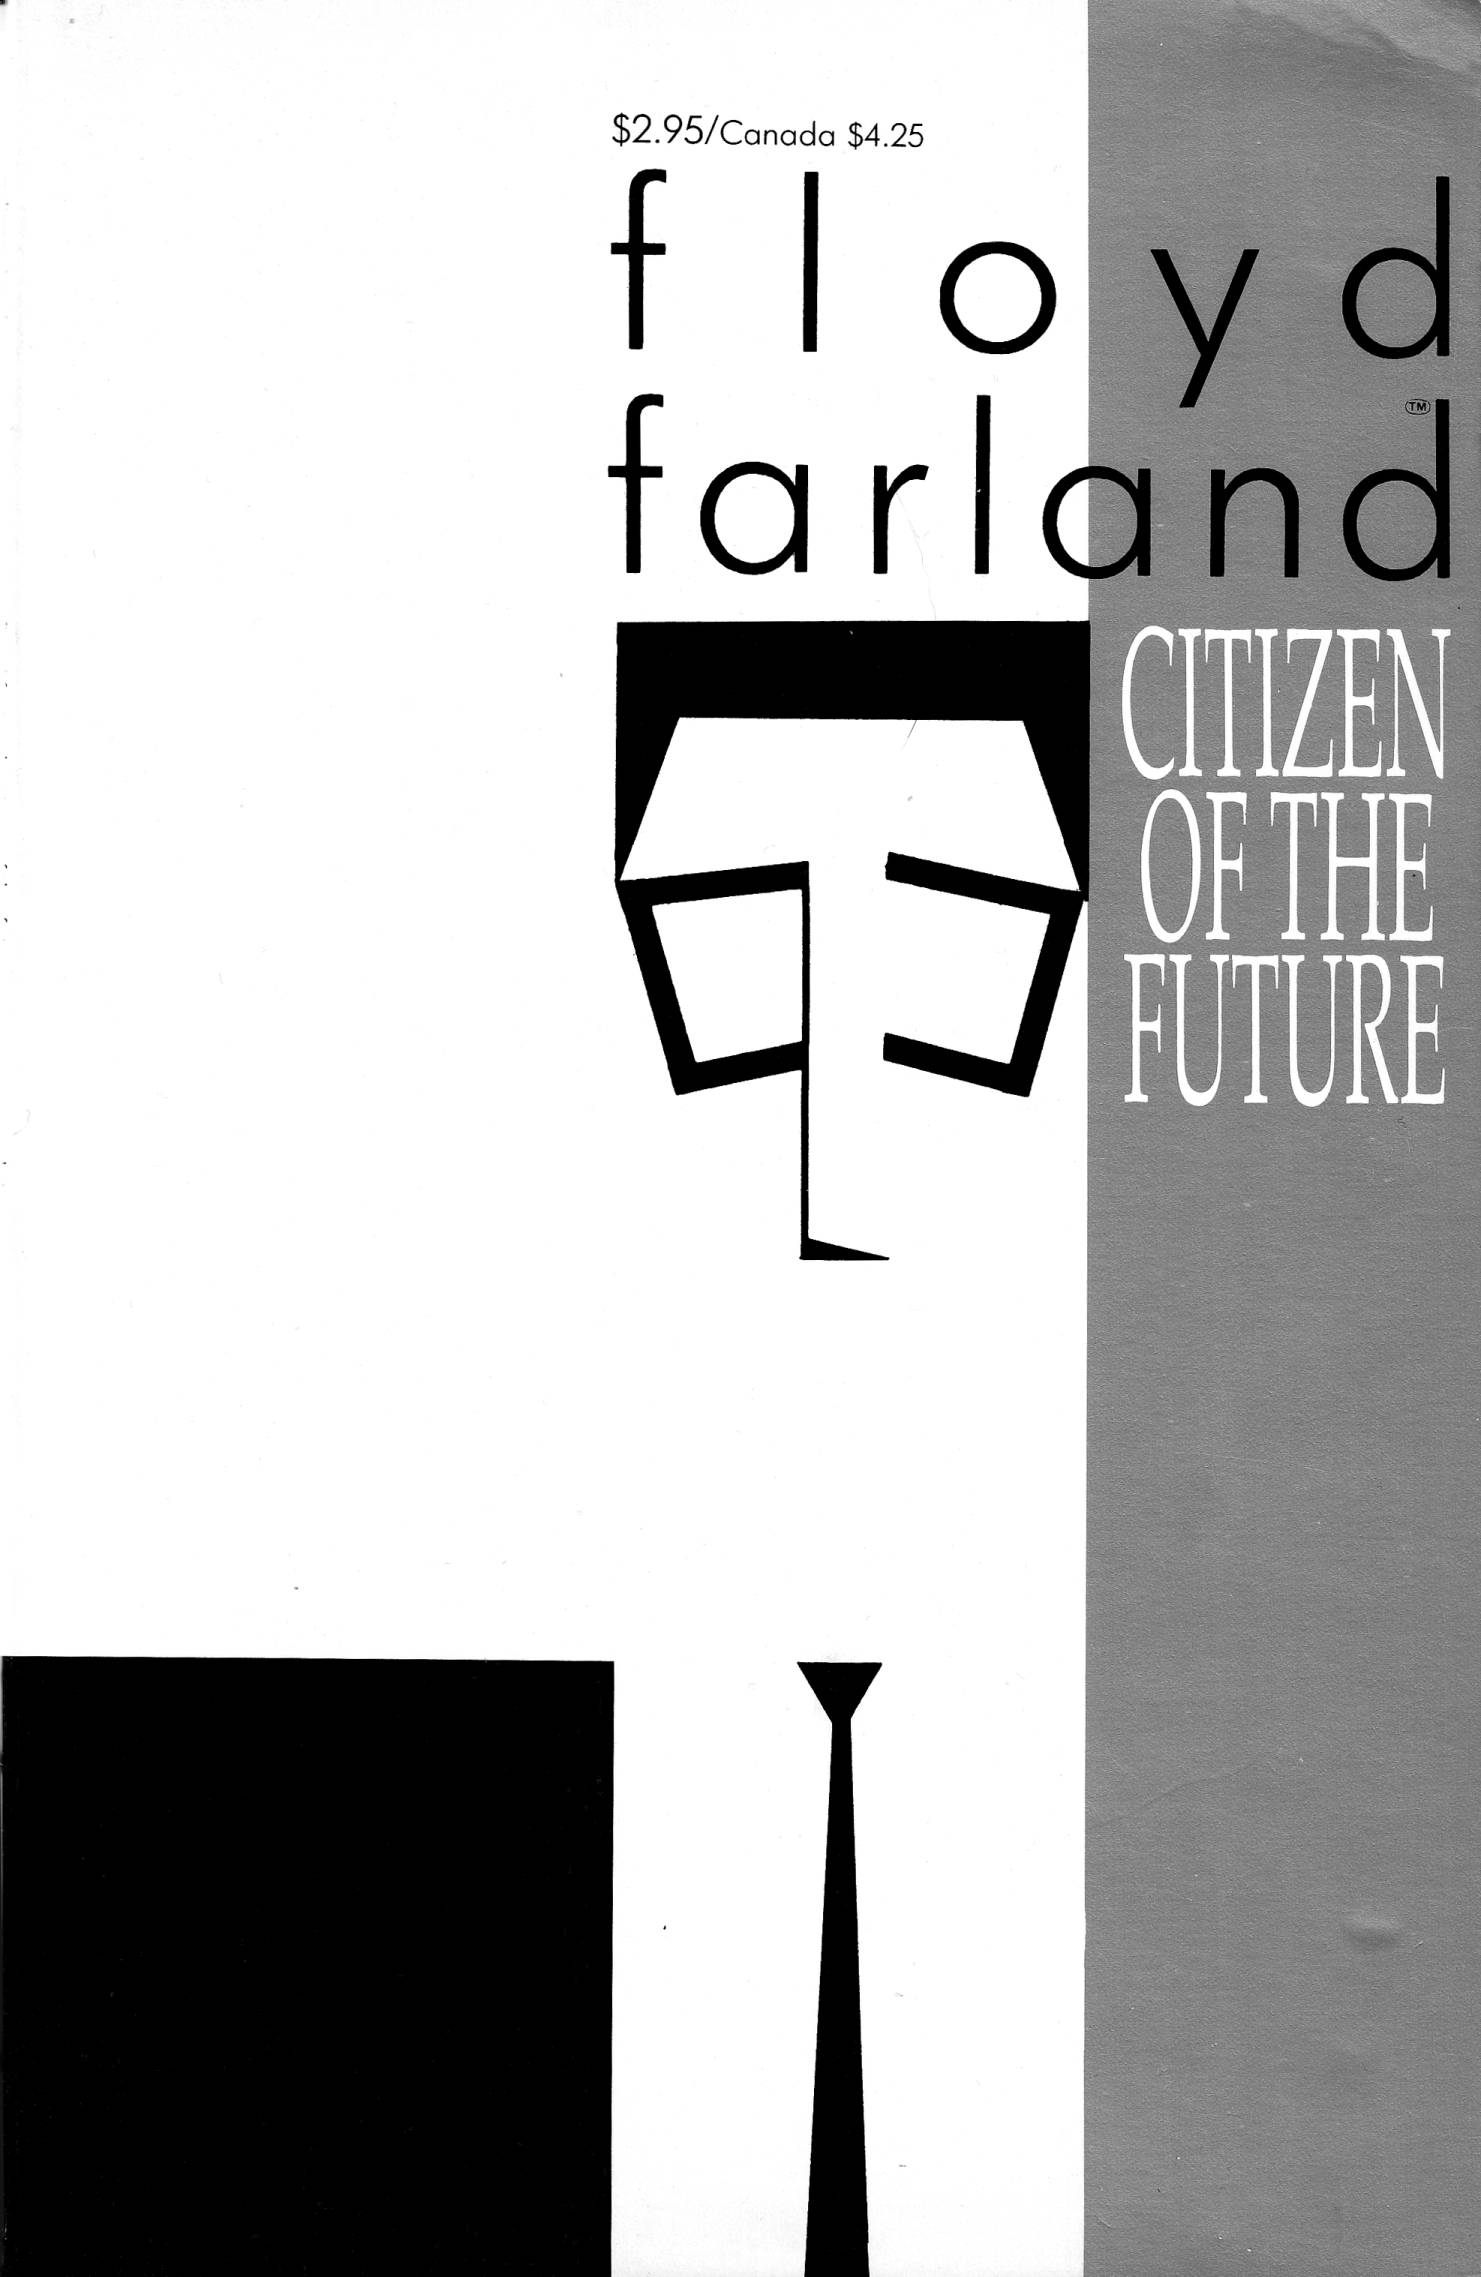 Read online Floyd Farland: Citizen of the Future comic -  Issue # Full - 1